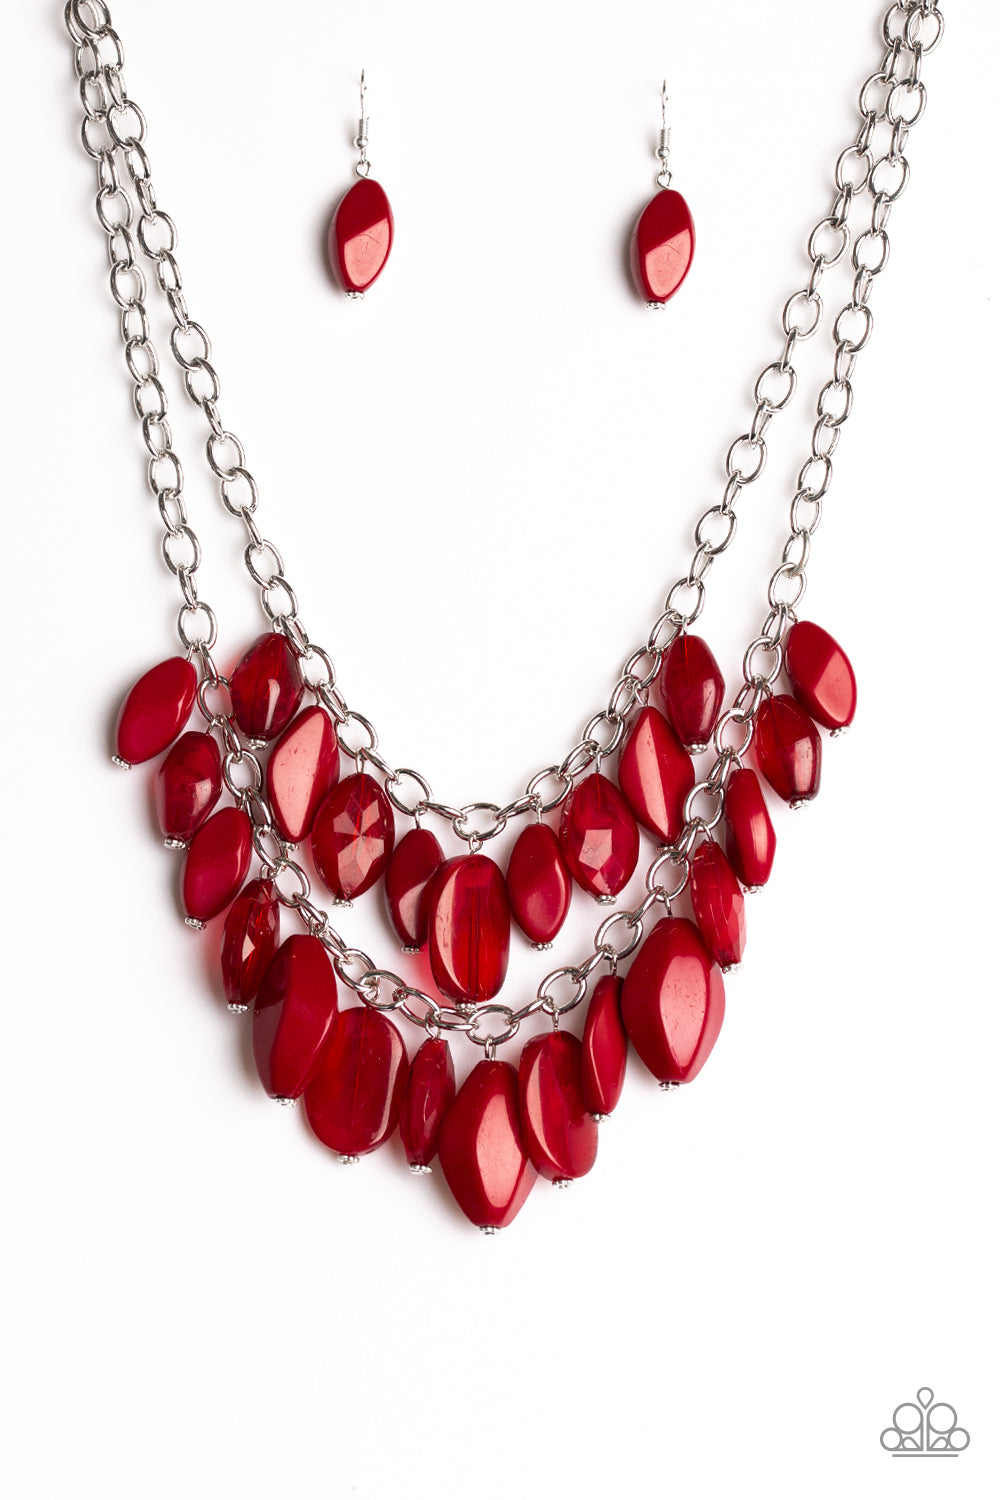 Paparazzi Accessories  - Royal Retreat - #N103 Red Necklace